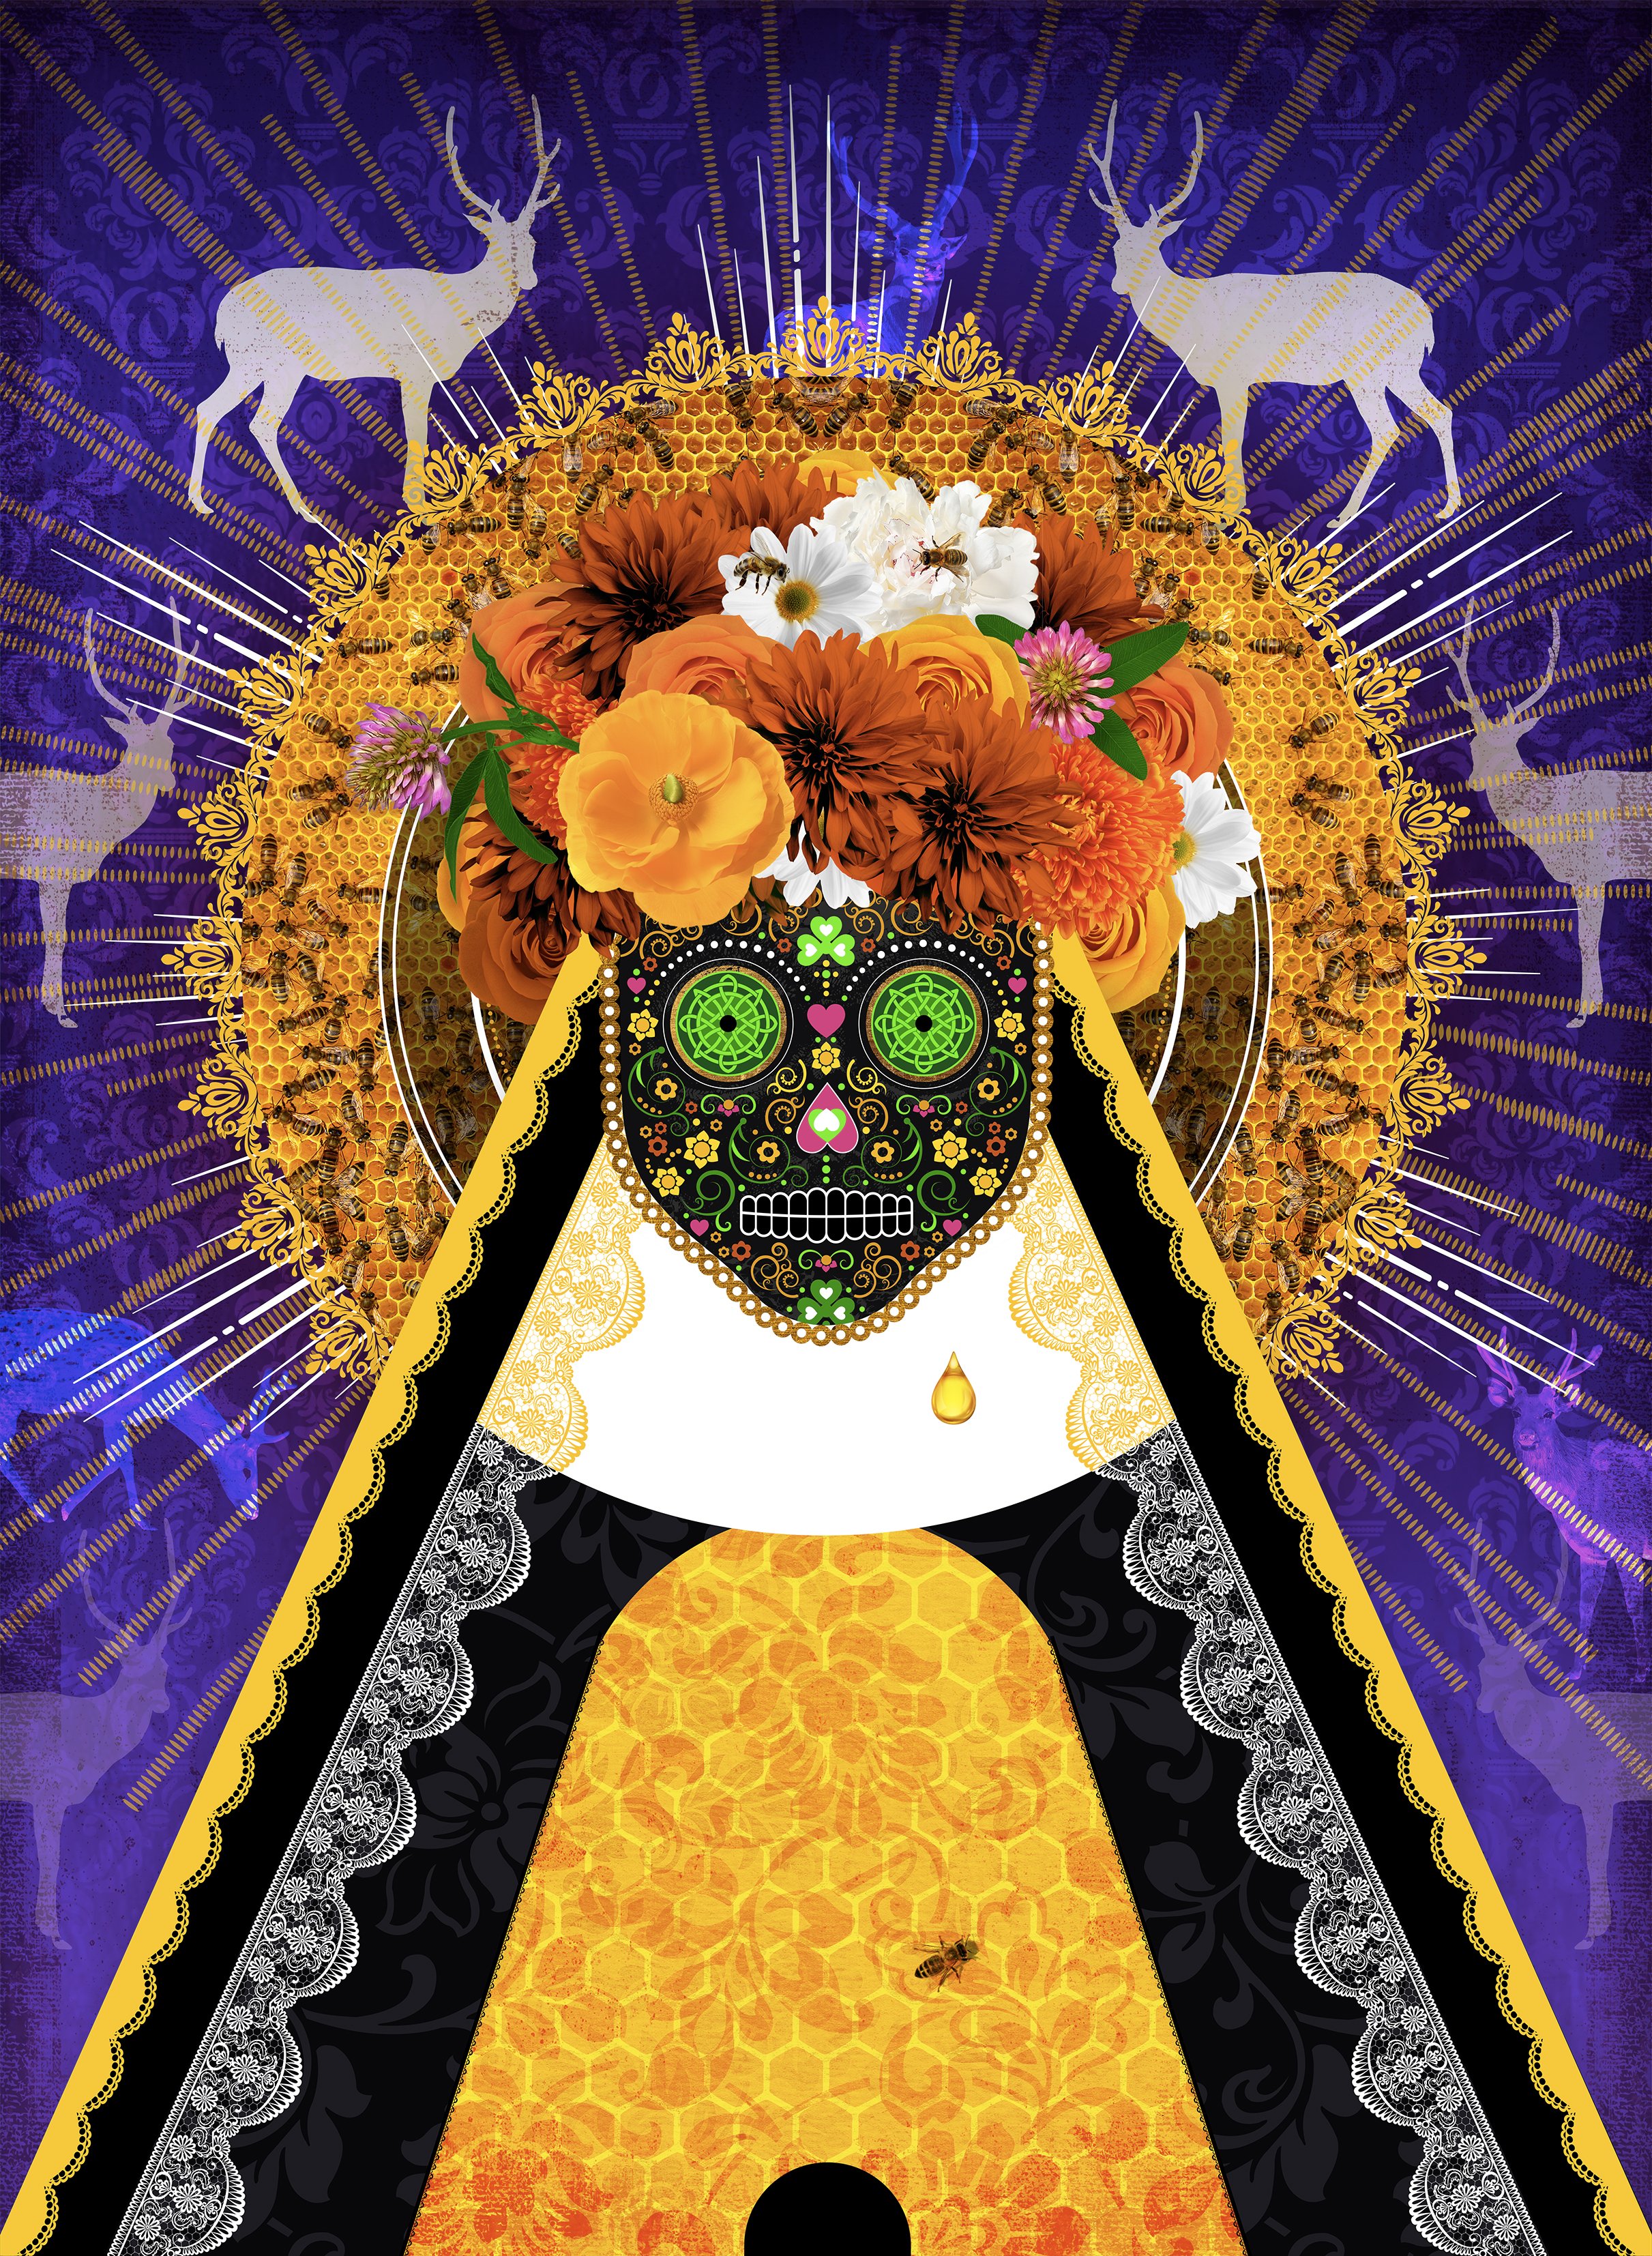 Saint Abigail of the Sacred Bees